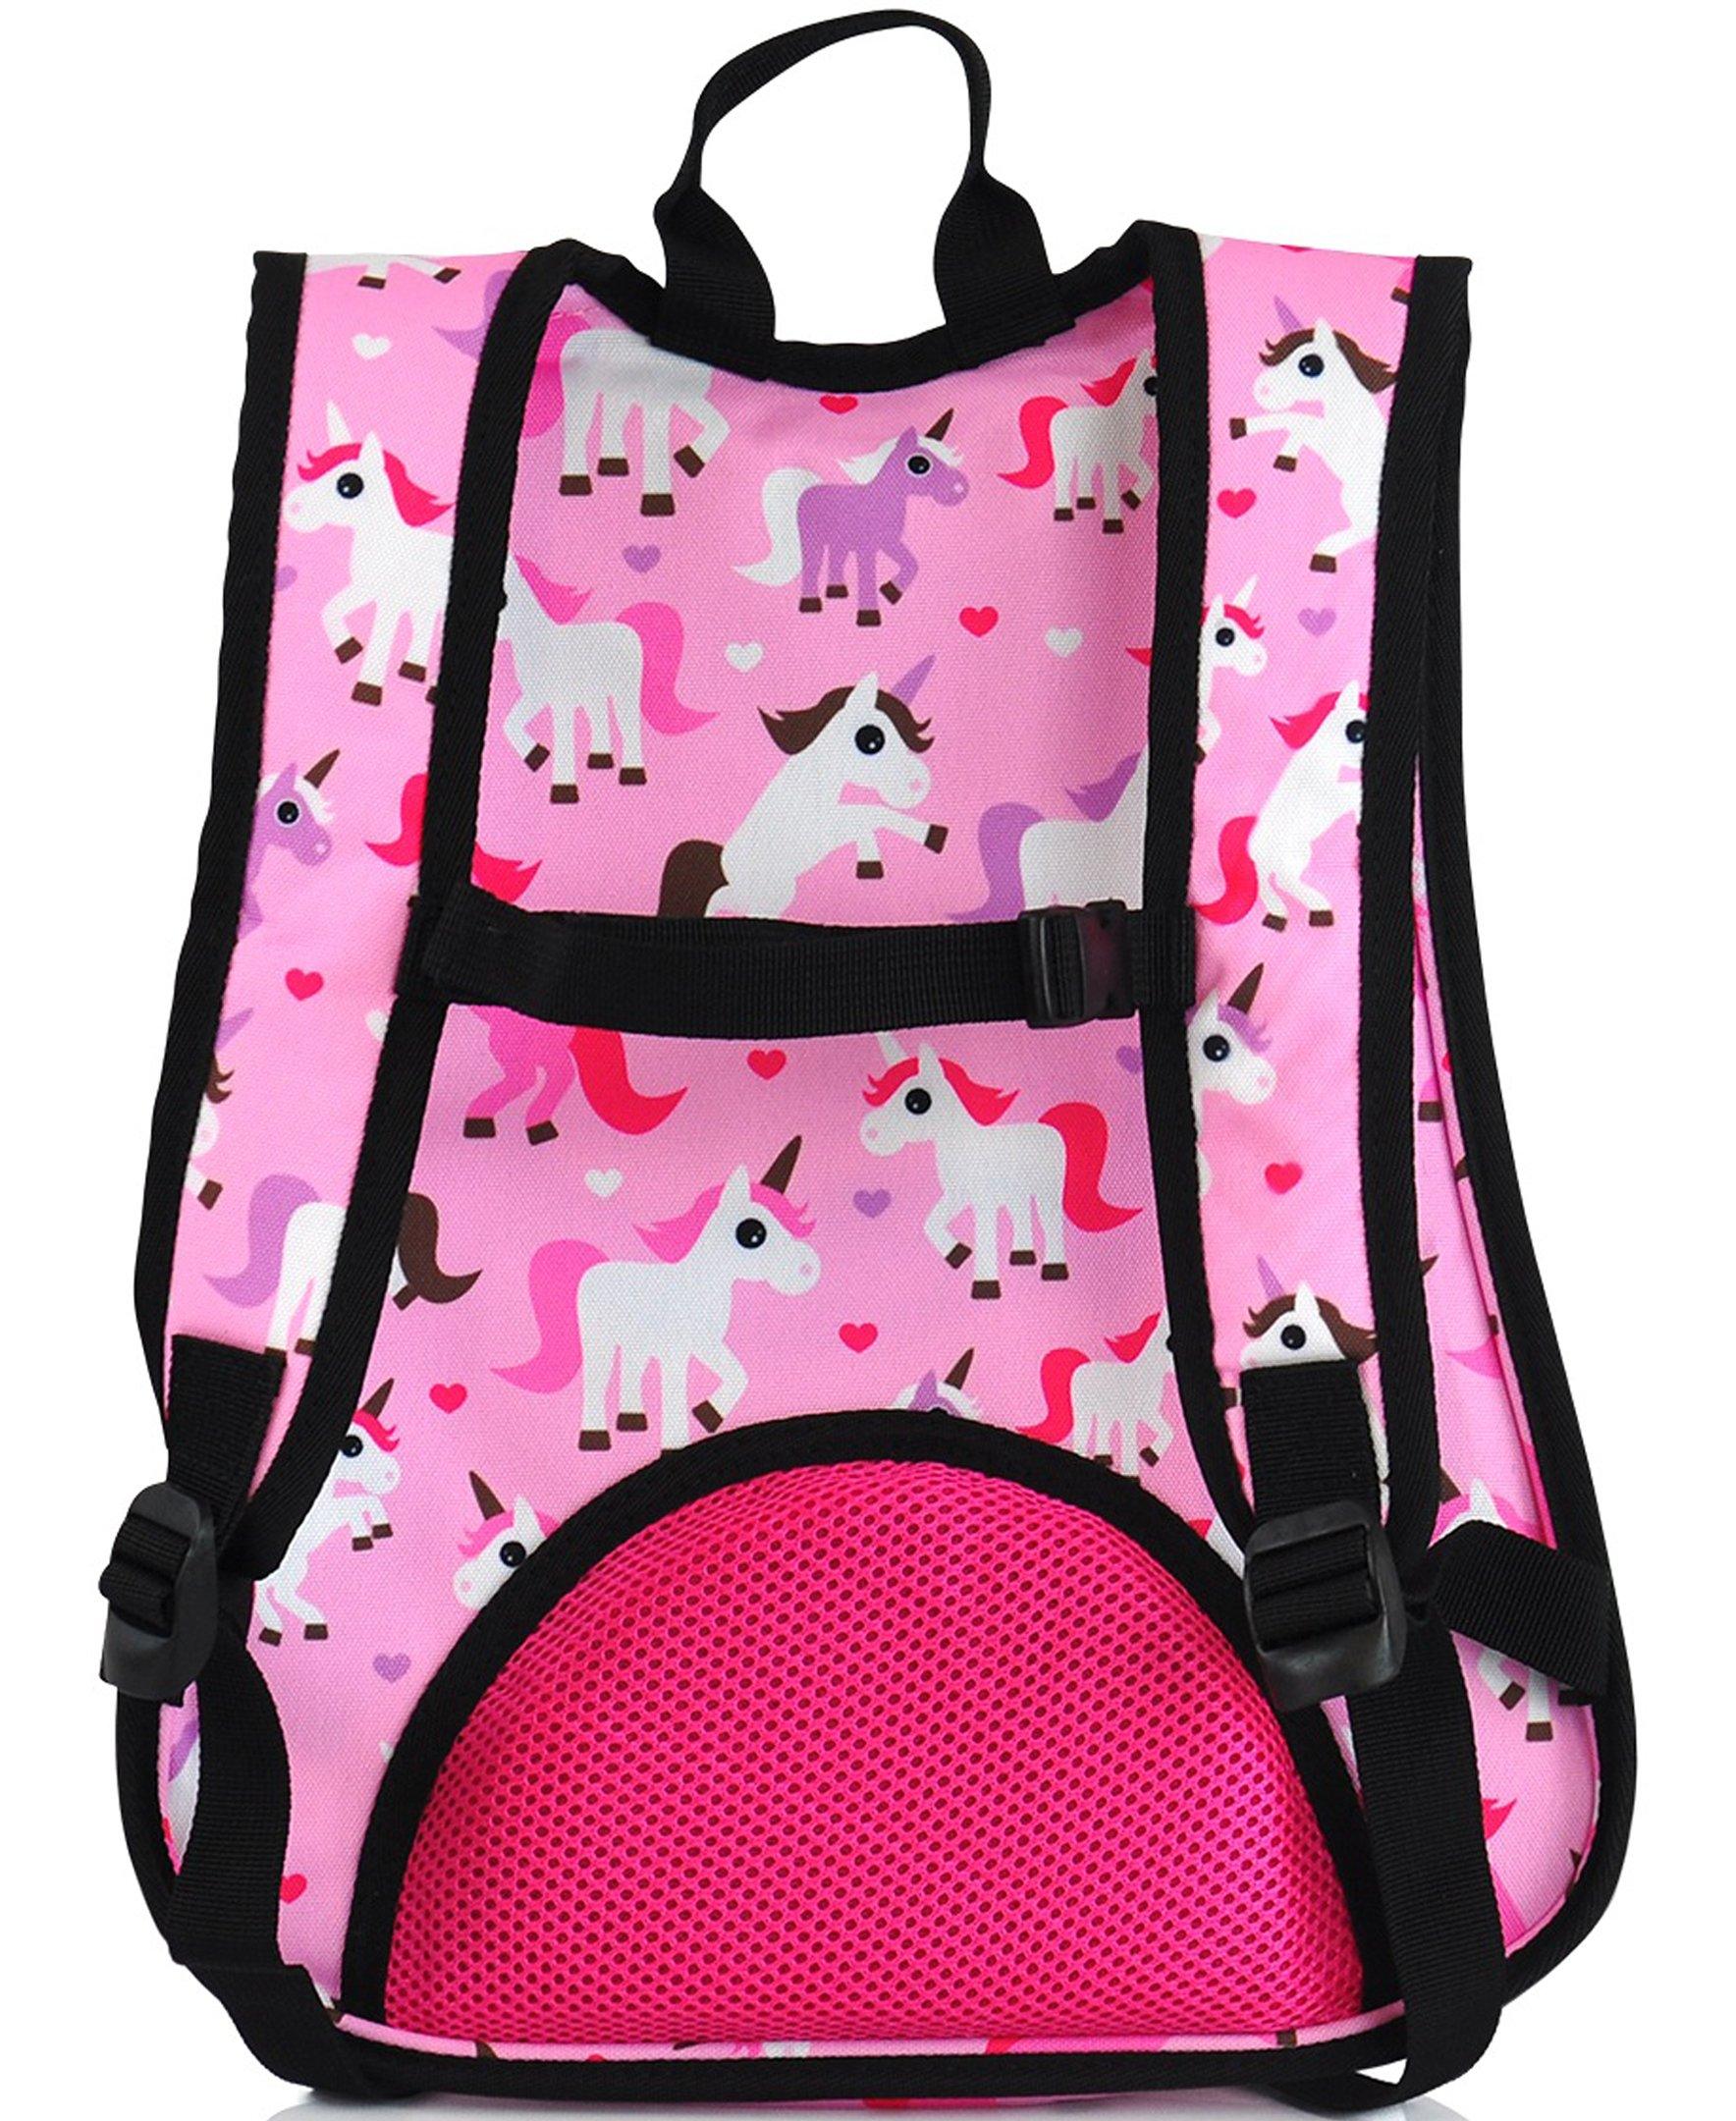 O3KCBP020 Obersee Mini Preschool All-in-One Backpack for Toddlers and Kids with integrated Insulated Cooler | Unicorn - image 2 of 5